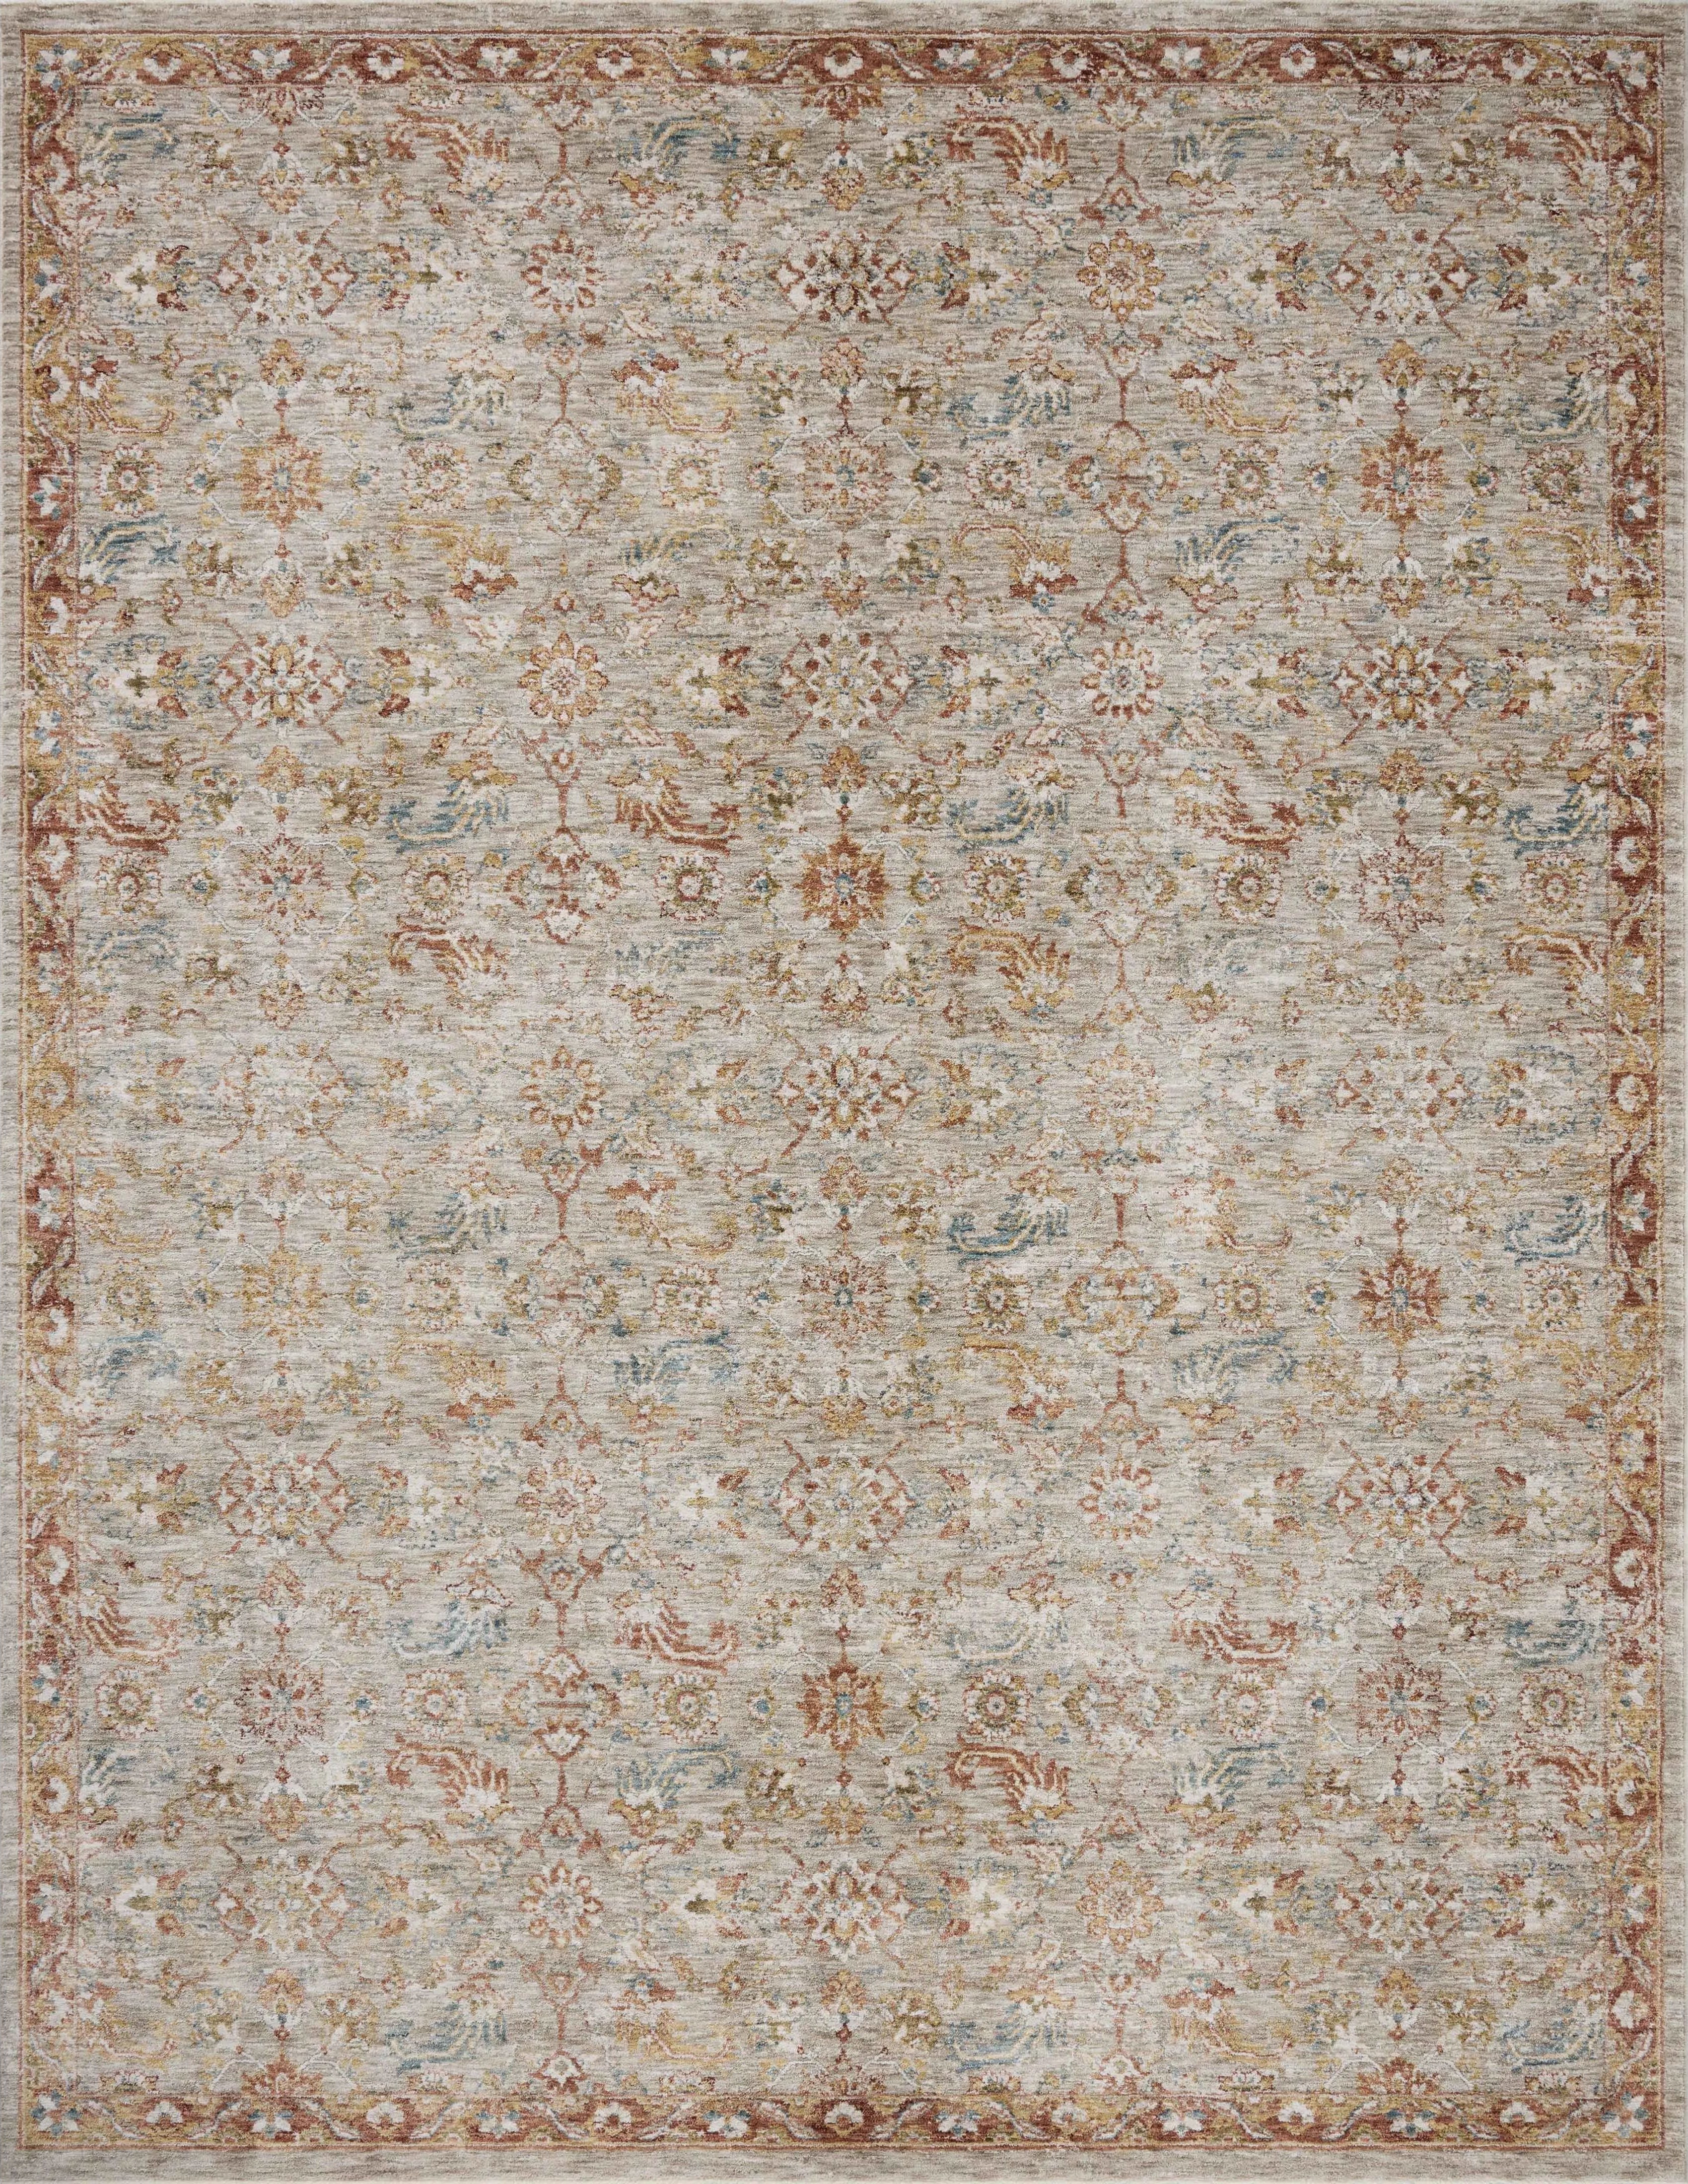 Power-loomed in Turkey of 100% polyester pile, the Gaia Natural / Multi Rug displays a classic color palette and a mix of abstract and traditional-inspired motifs. With a variation of warm and cool tones, mix of modern and classic designs, Gaia offers an option for all types of styles Amethyst Home provides interior design, new home construction design consulting, vintage area rugs, and lighting in the Nashville metro area.